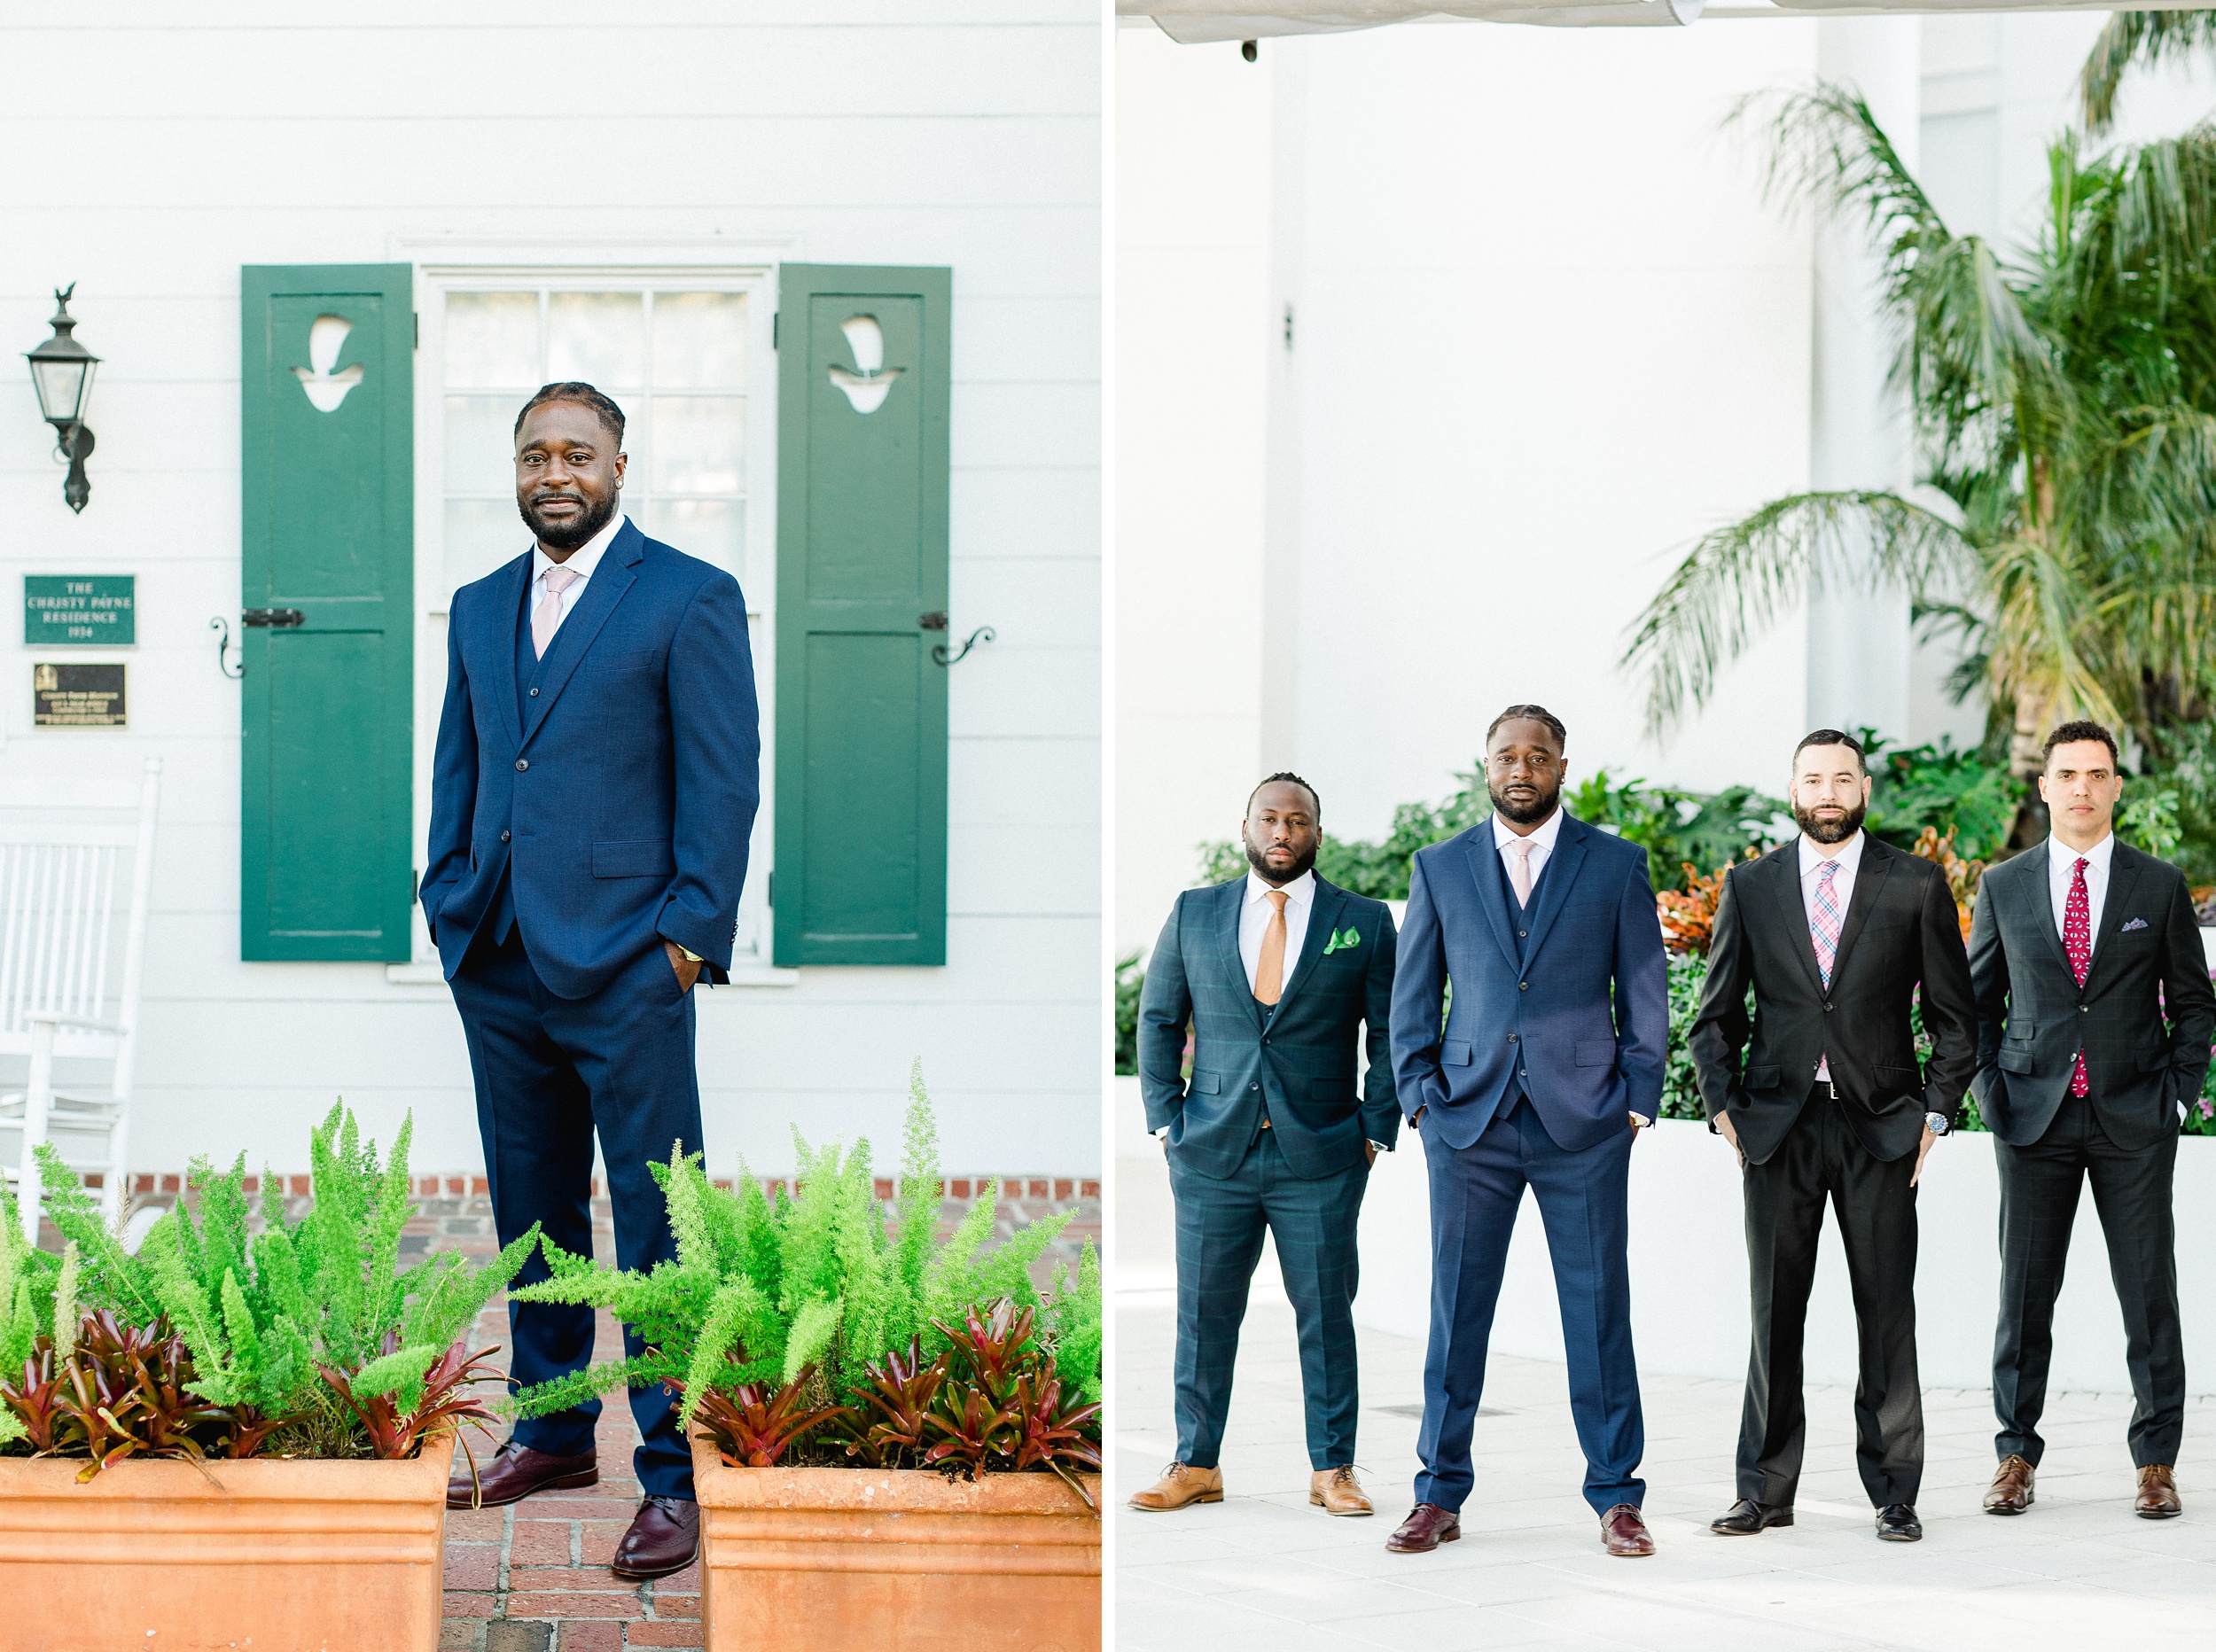 Selby Gardens Wedding | © Ailyn La Torre Photography 2019